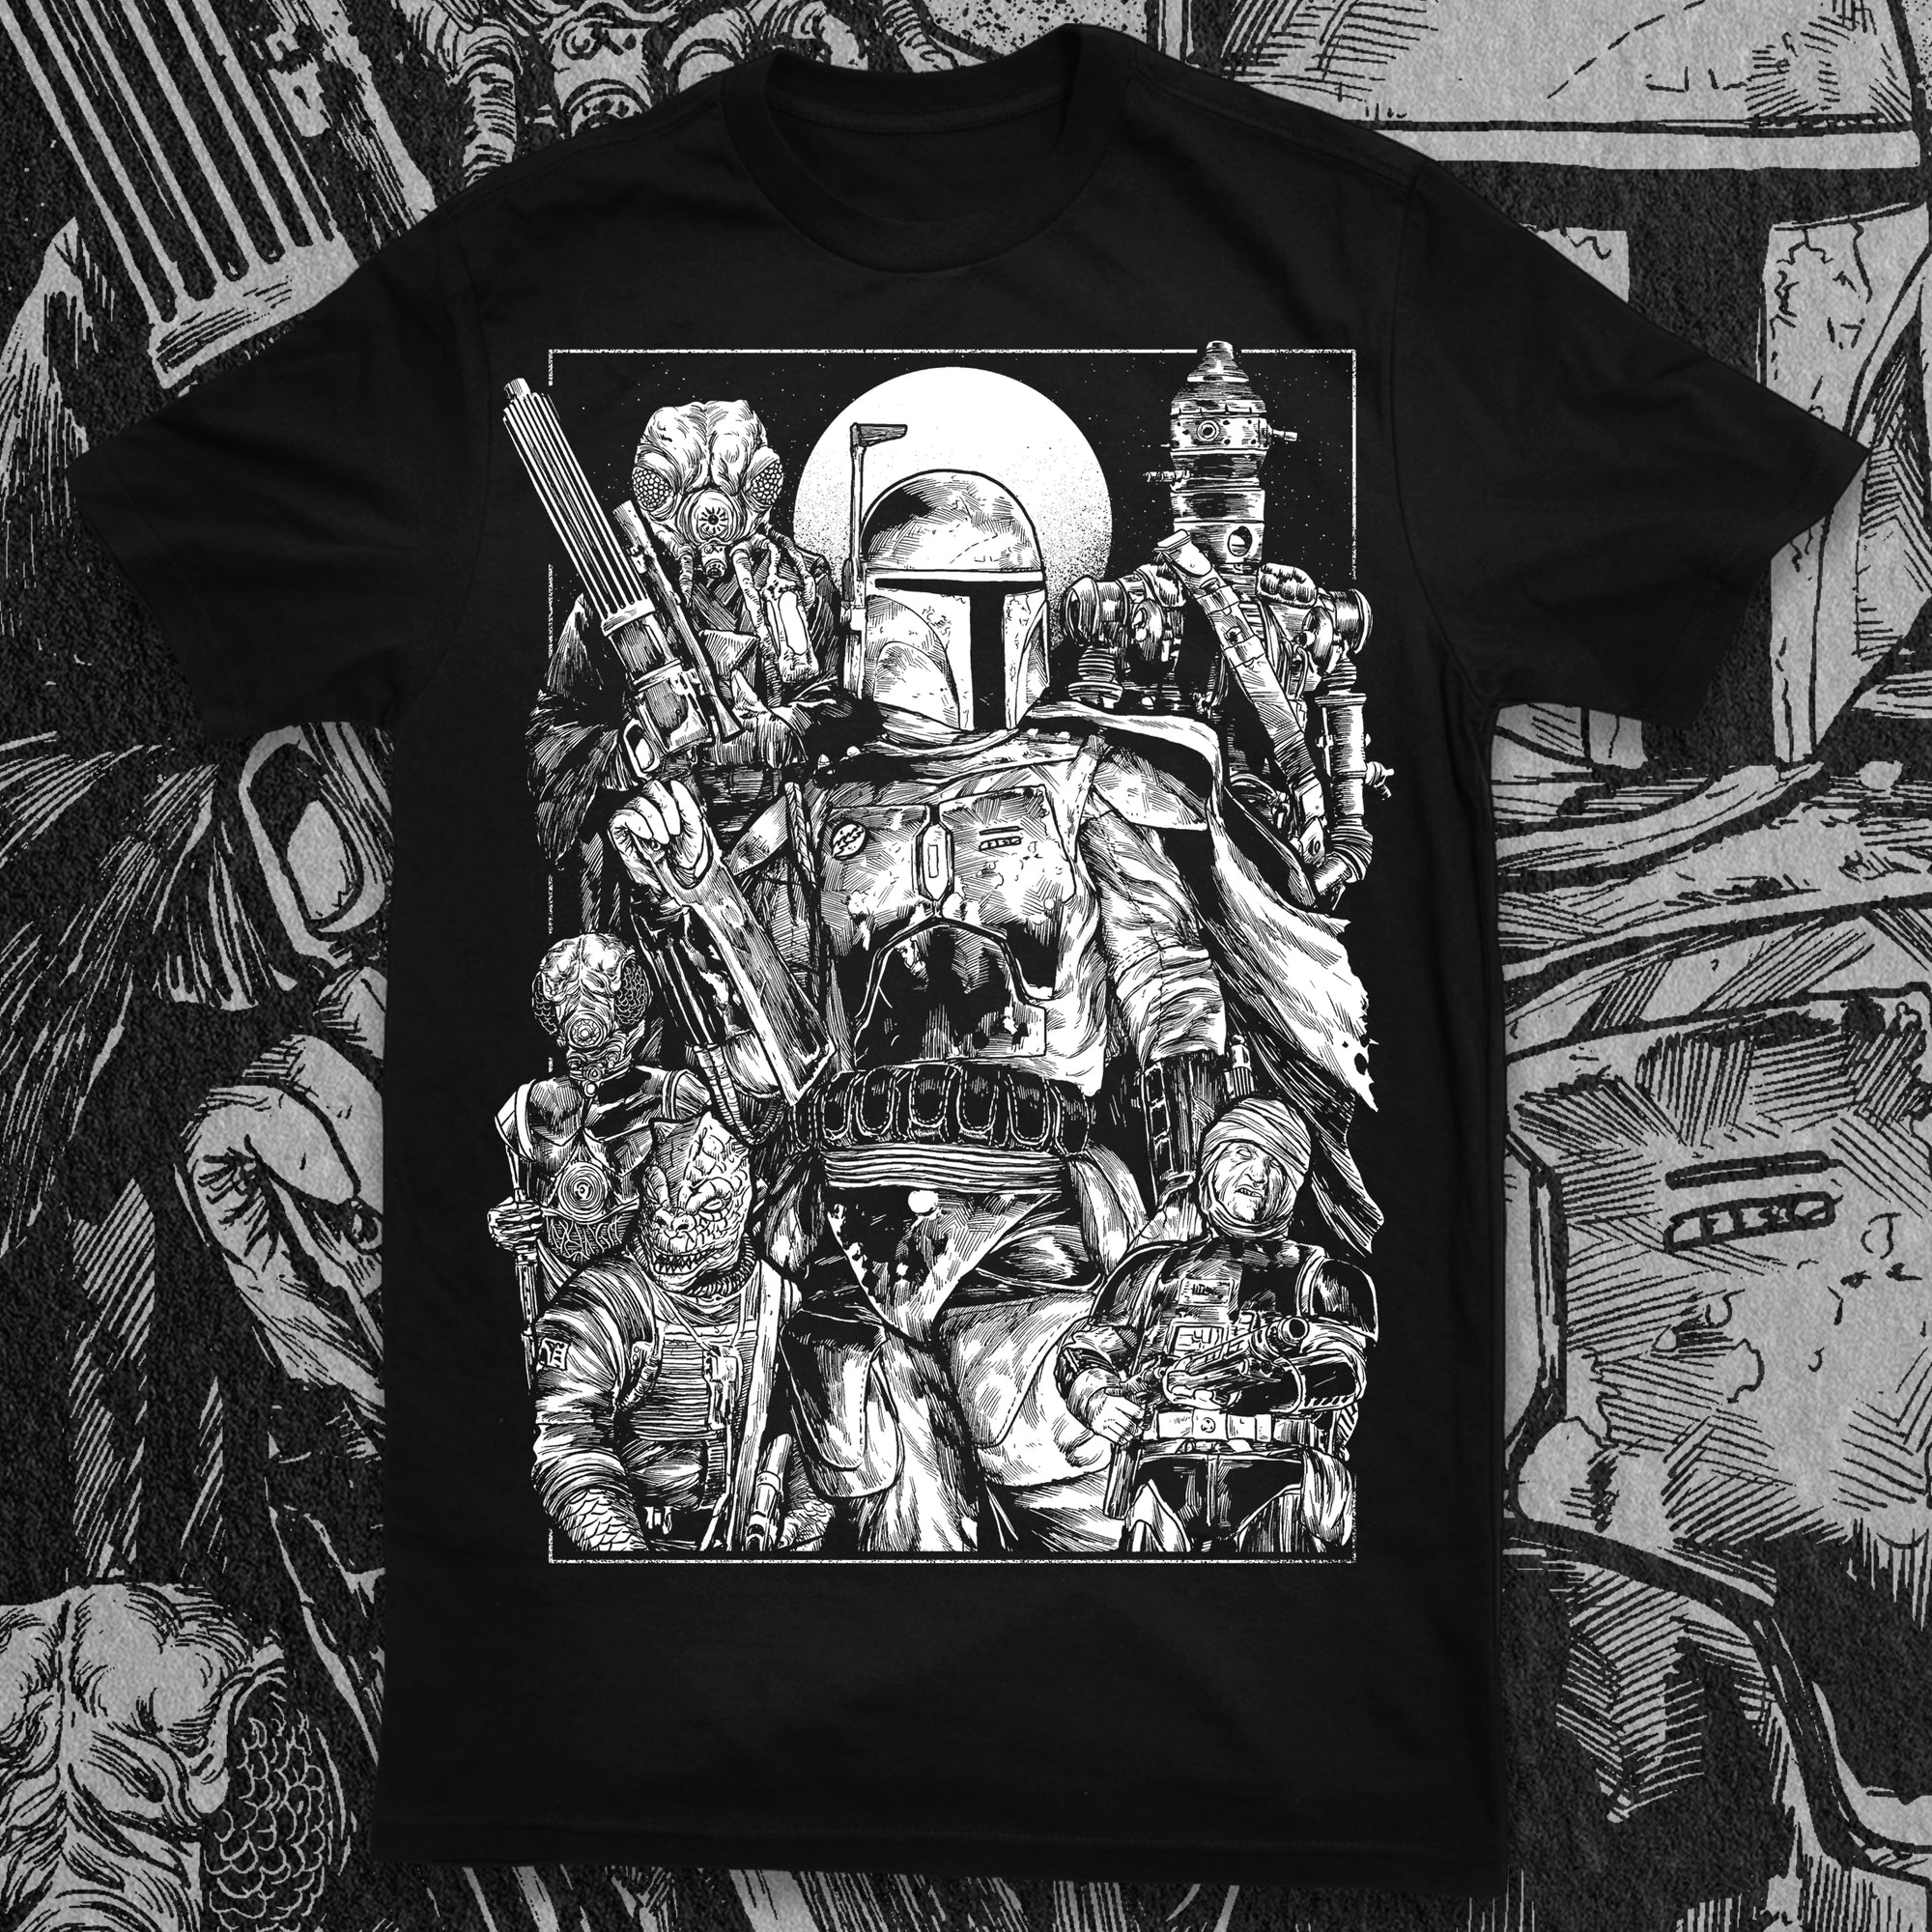 ABACROMBIE INK "BOUNTY HUNTERS" SHIRT